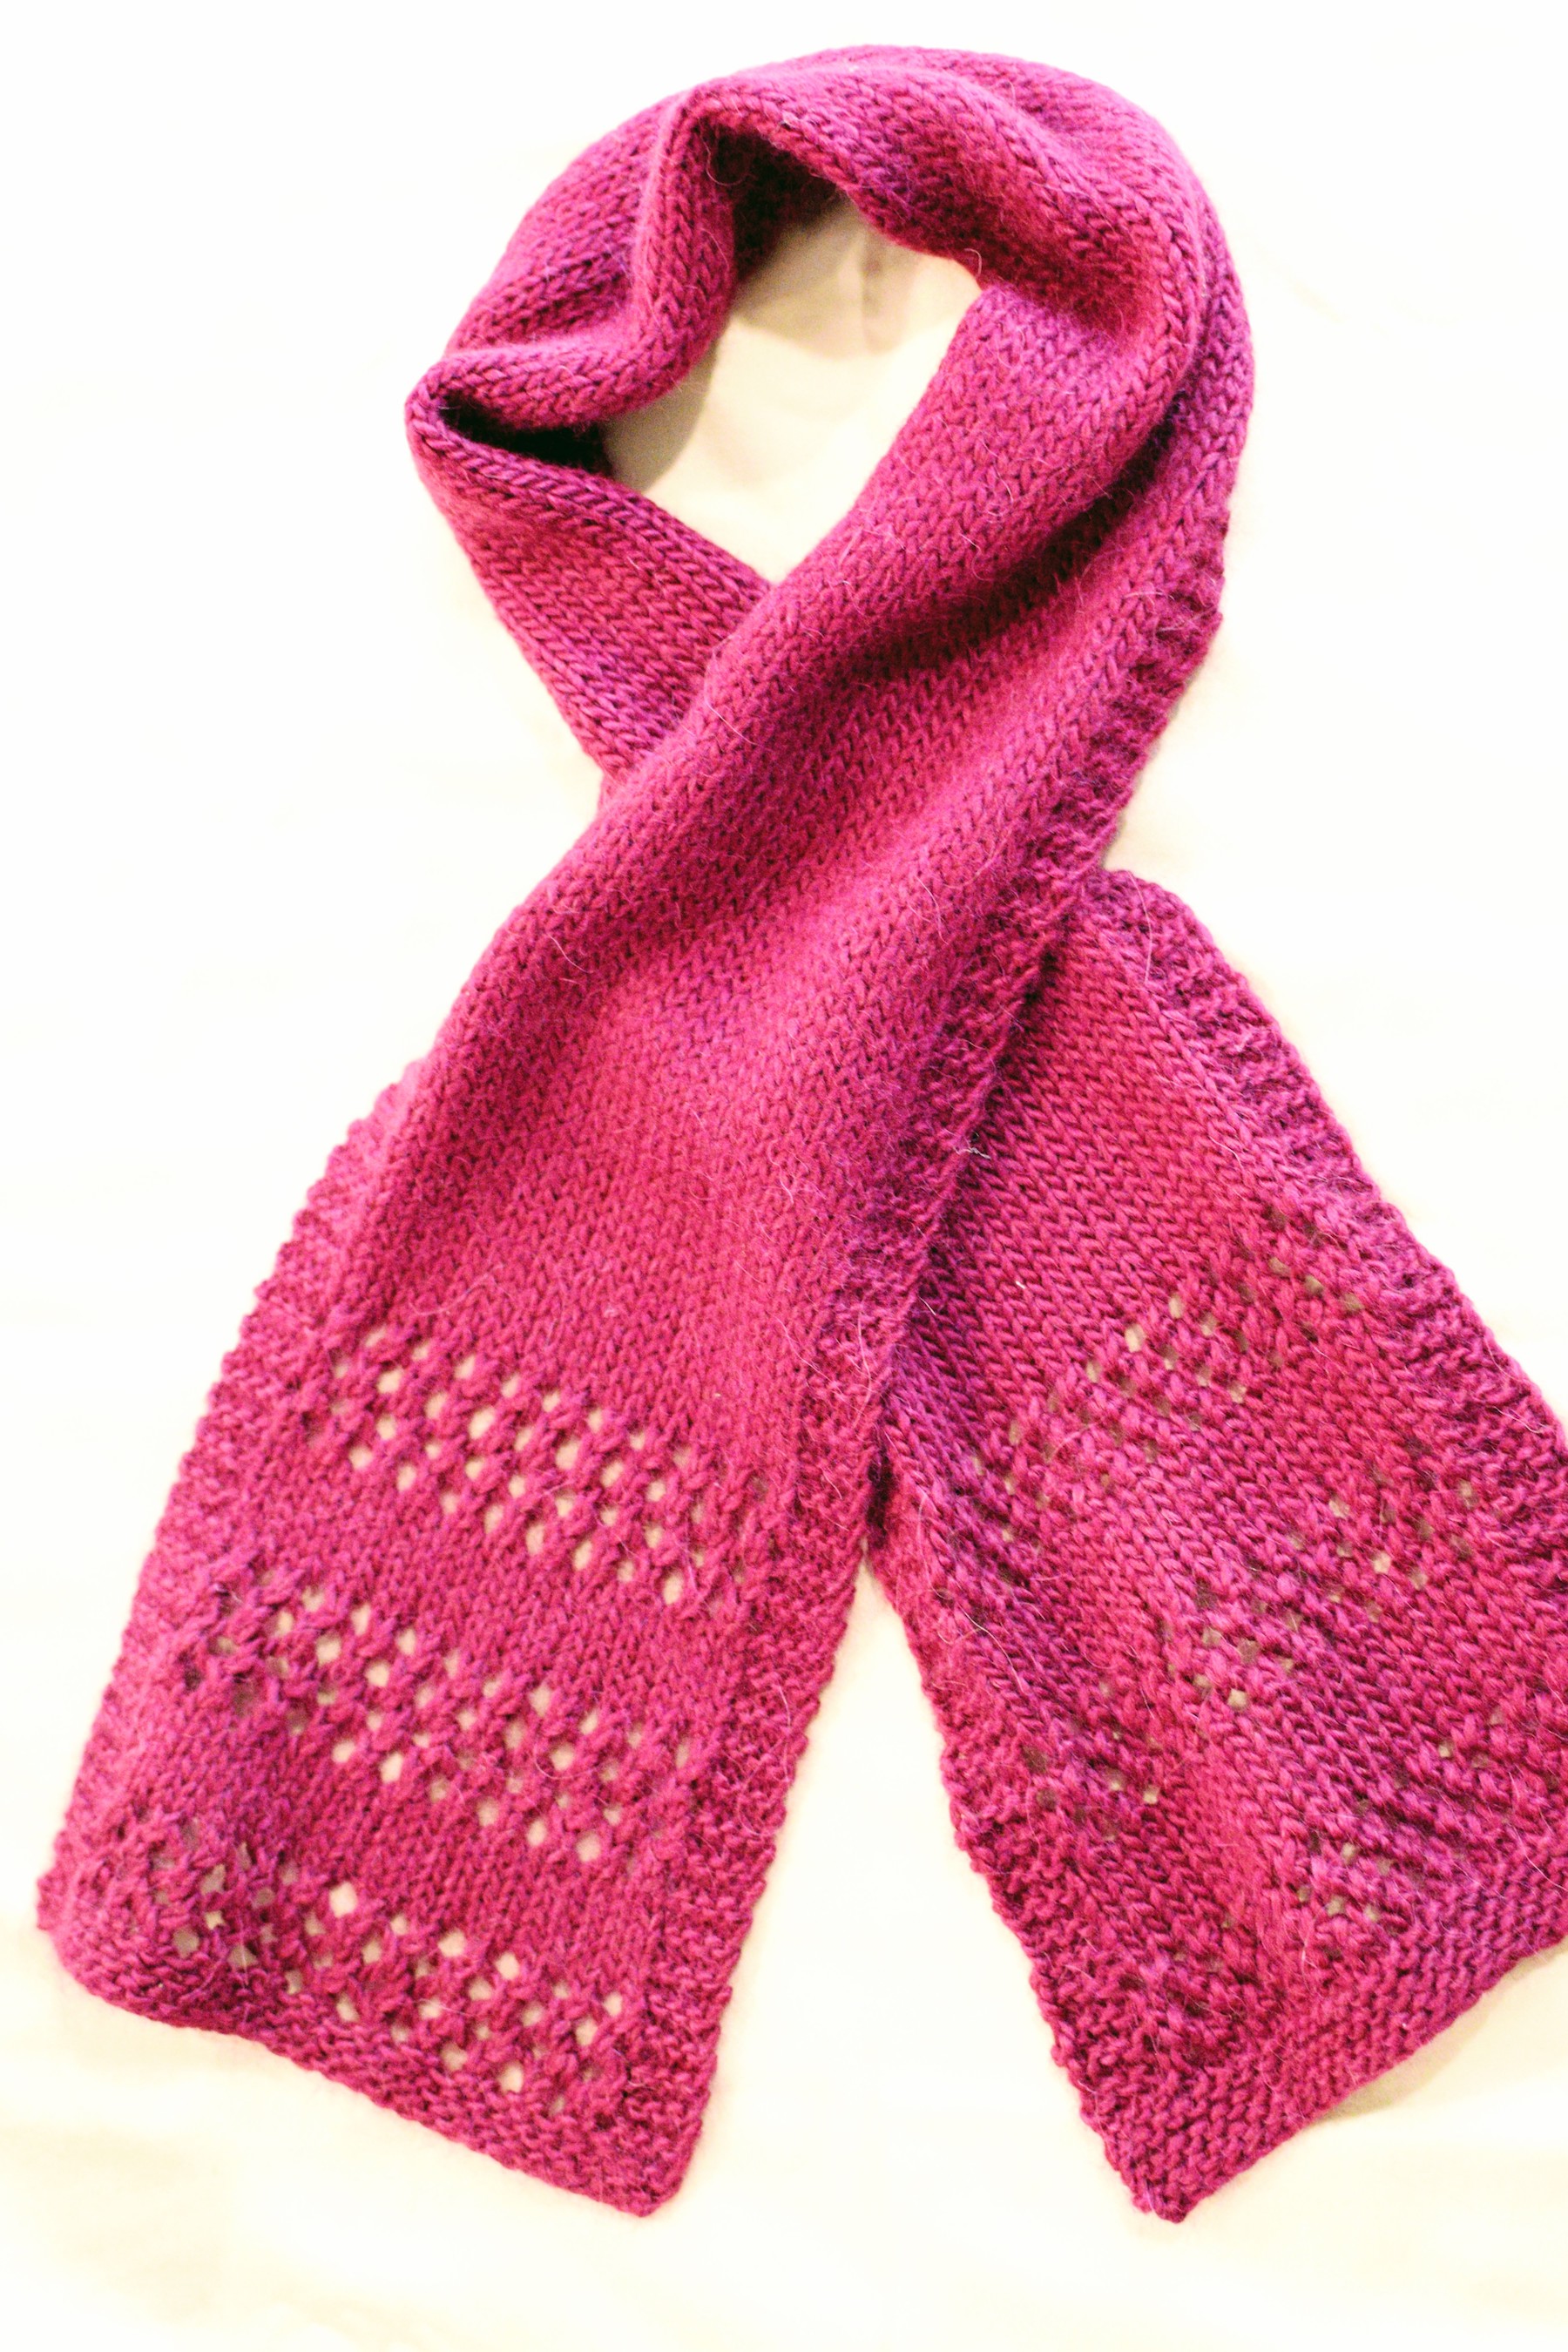 This is a basic eyelet scarf to help beginners get acquired to yarn over stitches and create beautiful pattern by combining many eyelets.